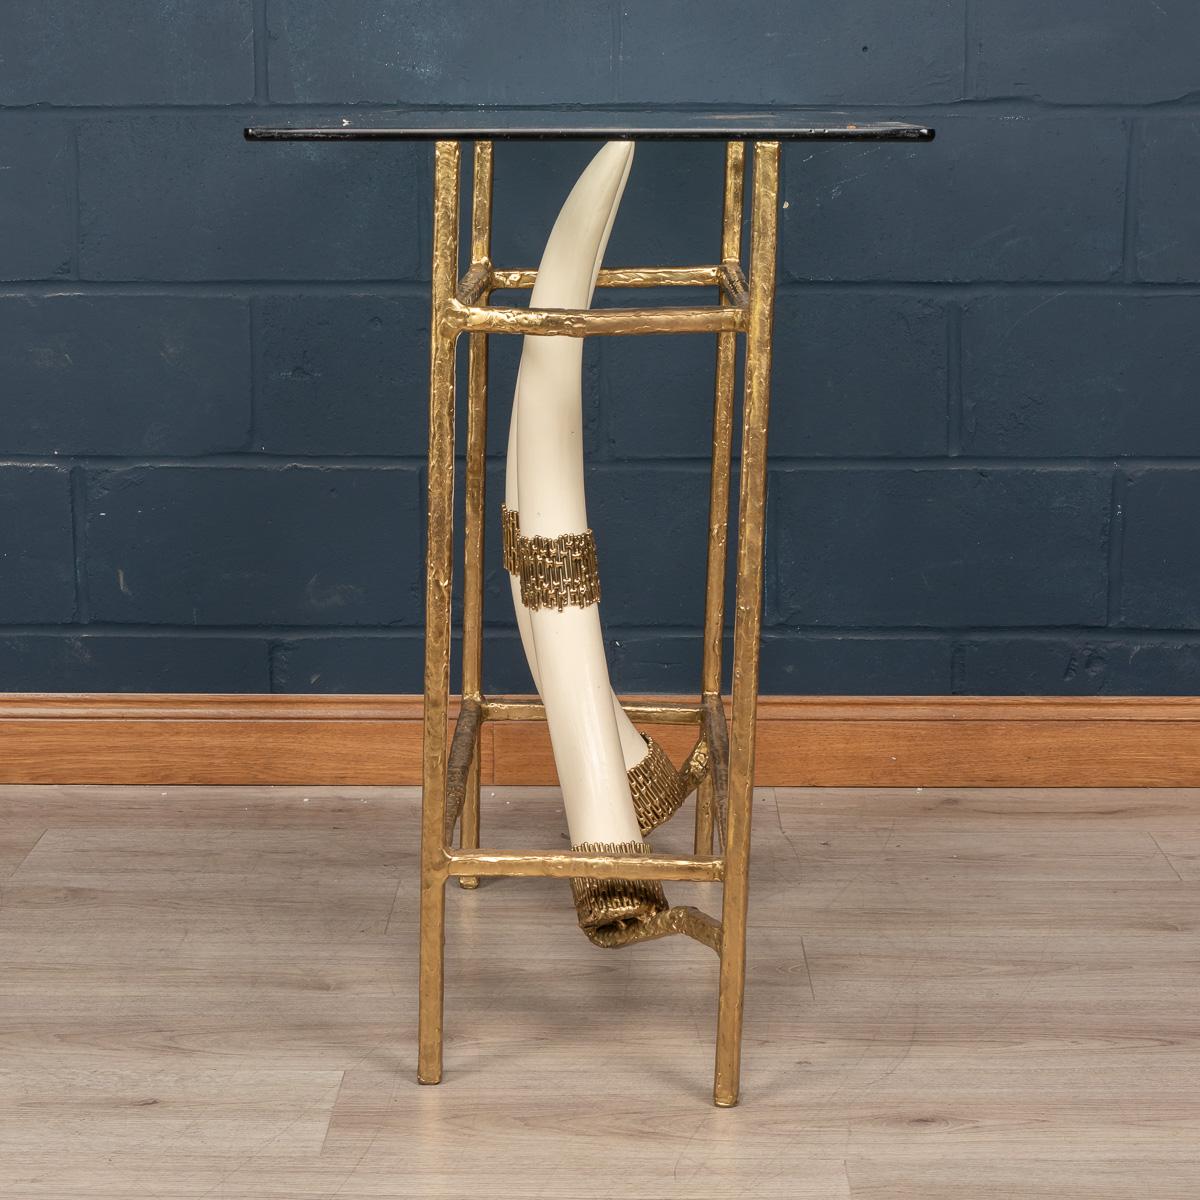 20th Century French Resin Tusks Console Table by Henri Fernandez, c.1970 For Sale 1